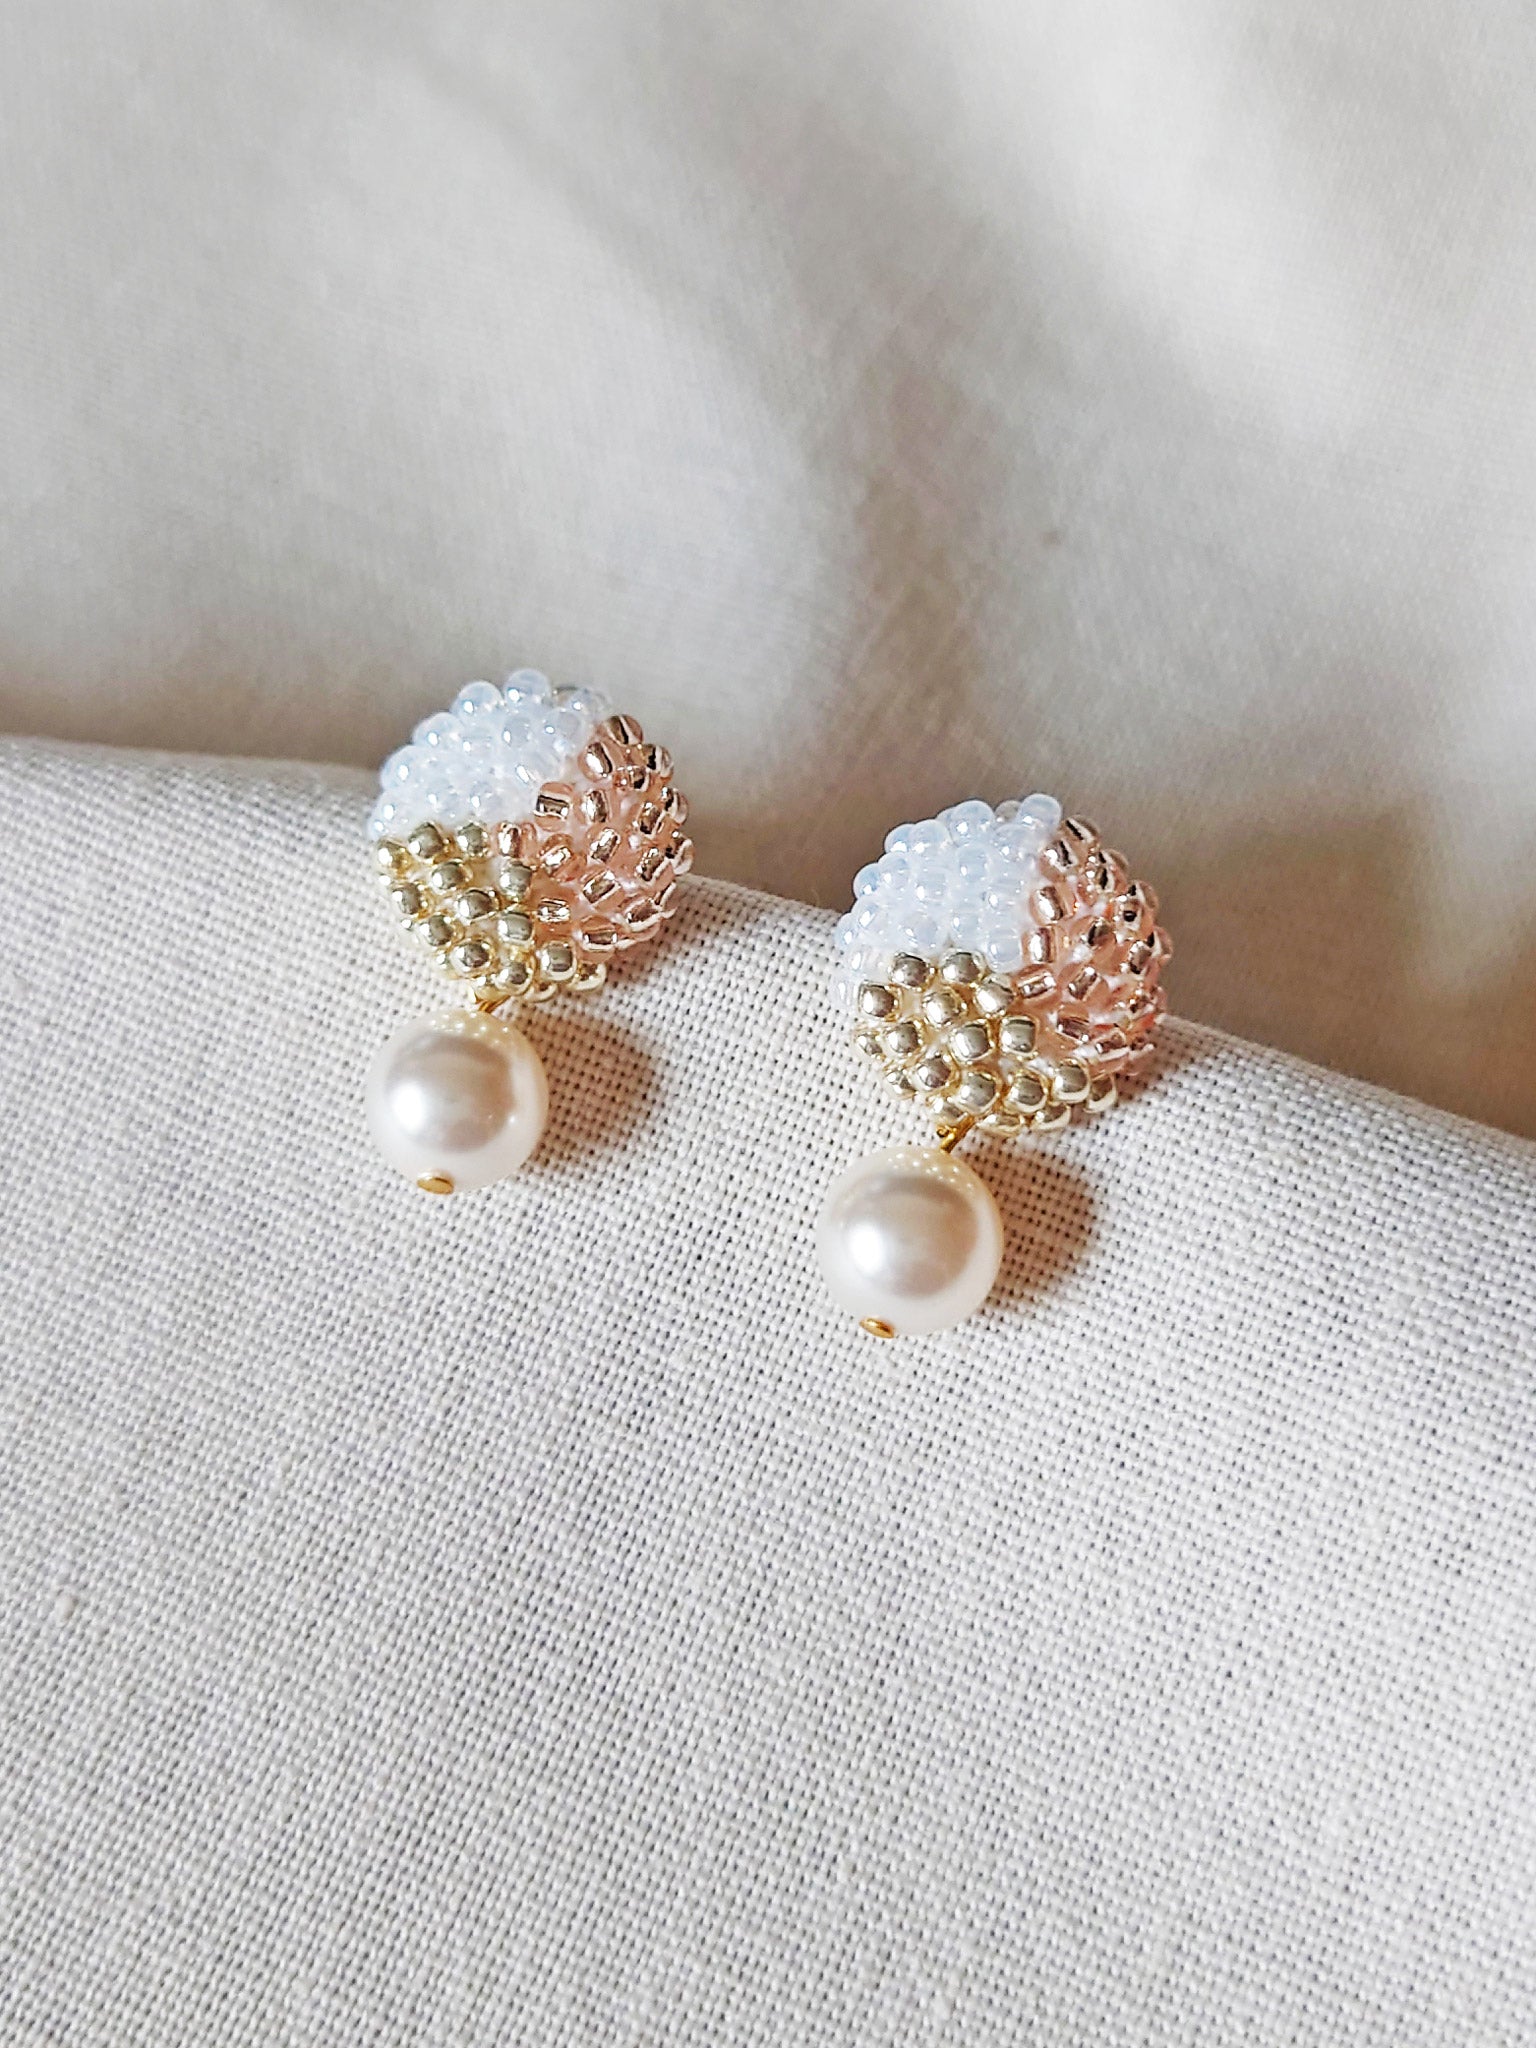 Mariota Trio Earrings in Champagne Pink Front